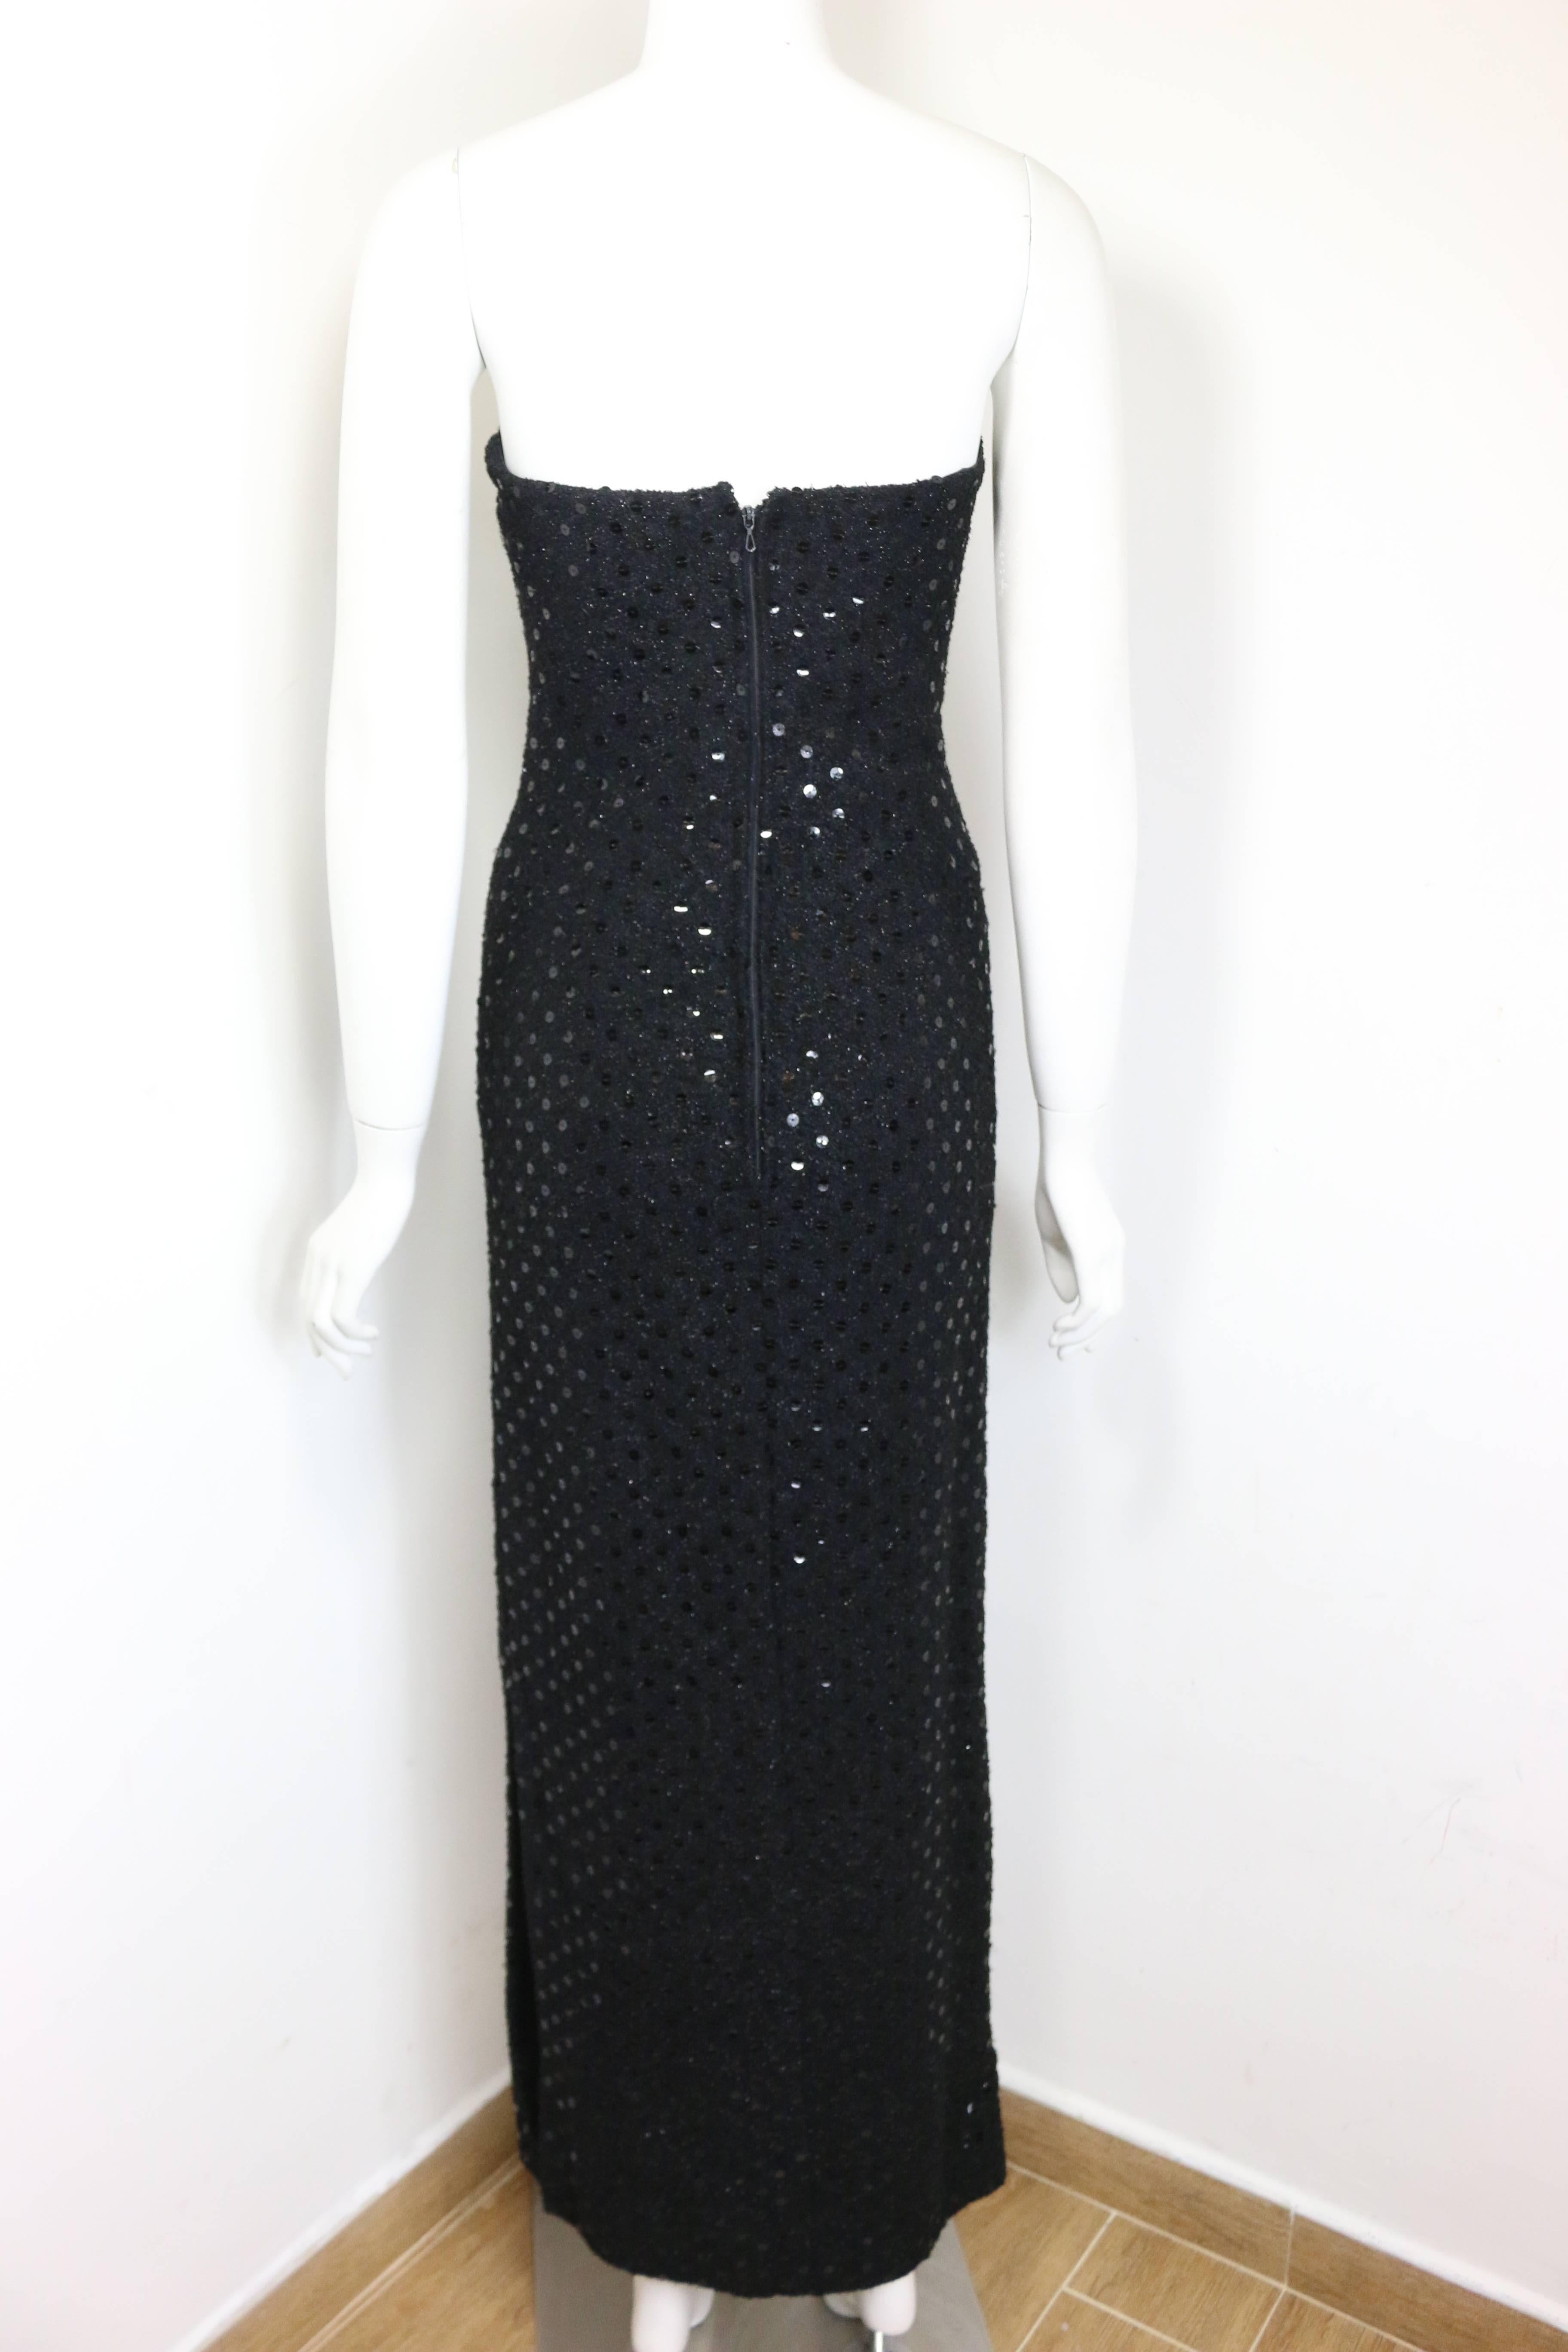 - Vintage Chanel black tweed with black sequins long tube evening dress from 1983 to 1984 collection. Featuring an invisible back zip closure, a slit on the left side hem. A very classic item and it is one of Karl Lagerfeld early work masterpiece in